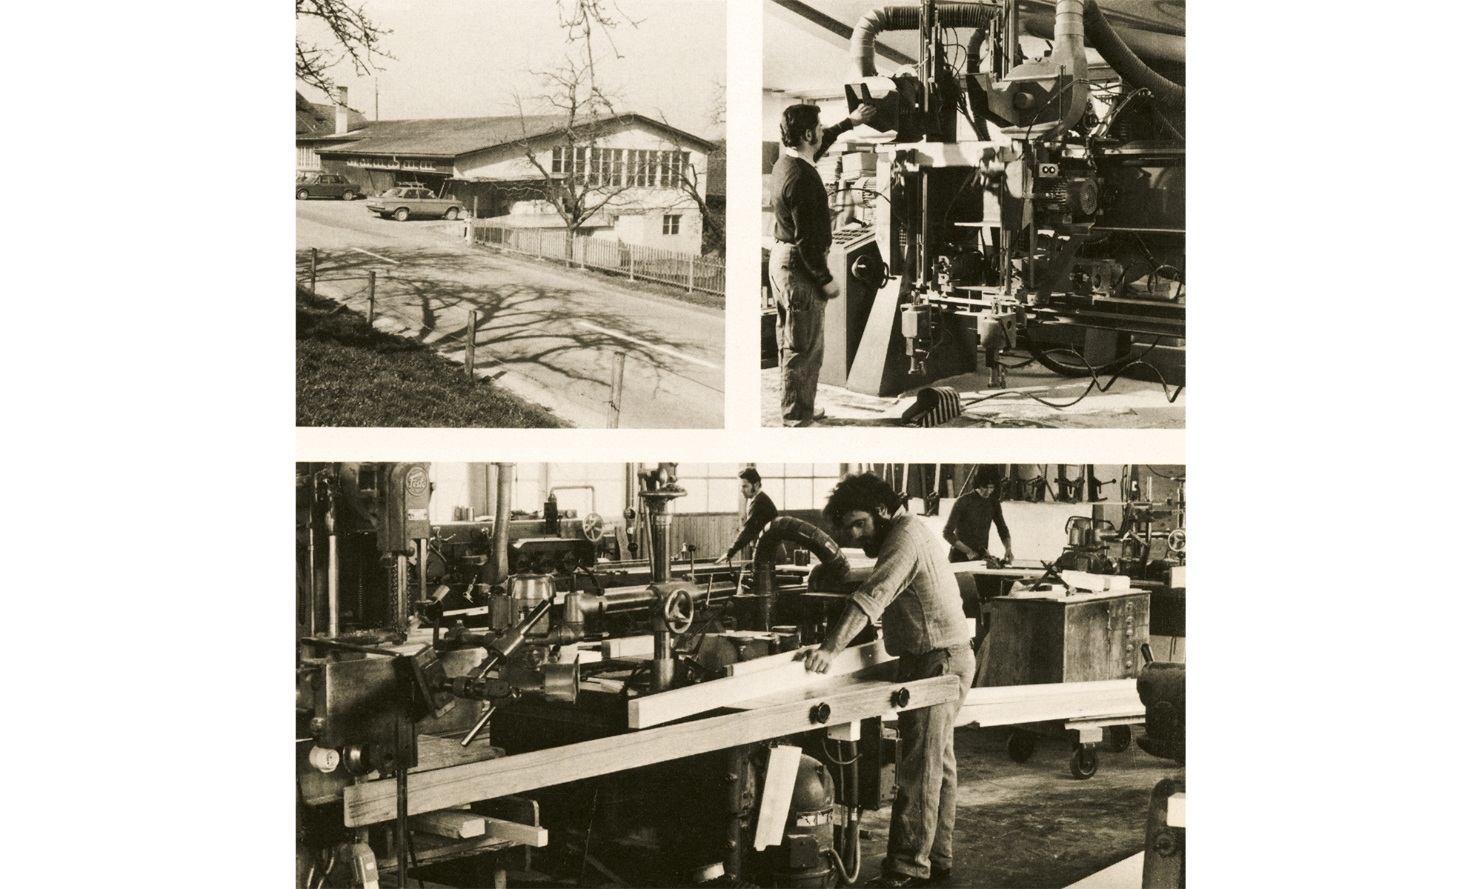 Three old photos showing inside and outside of Scheiwiler’s timber construction business in Edliswil